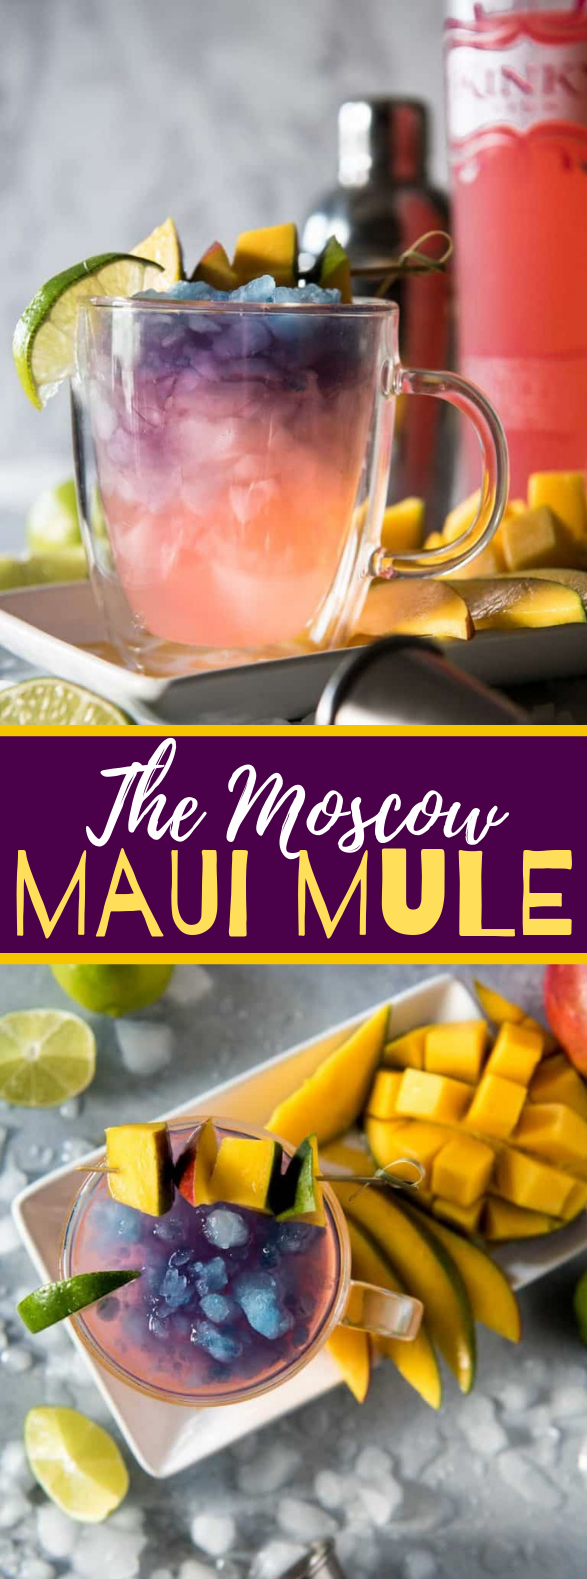 THE MAUI MOSCOW MULE #drink #vodka